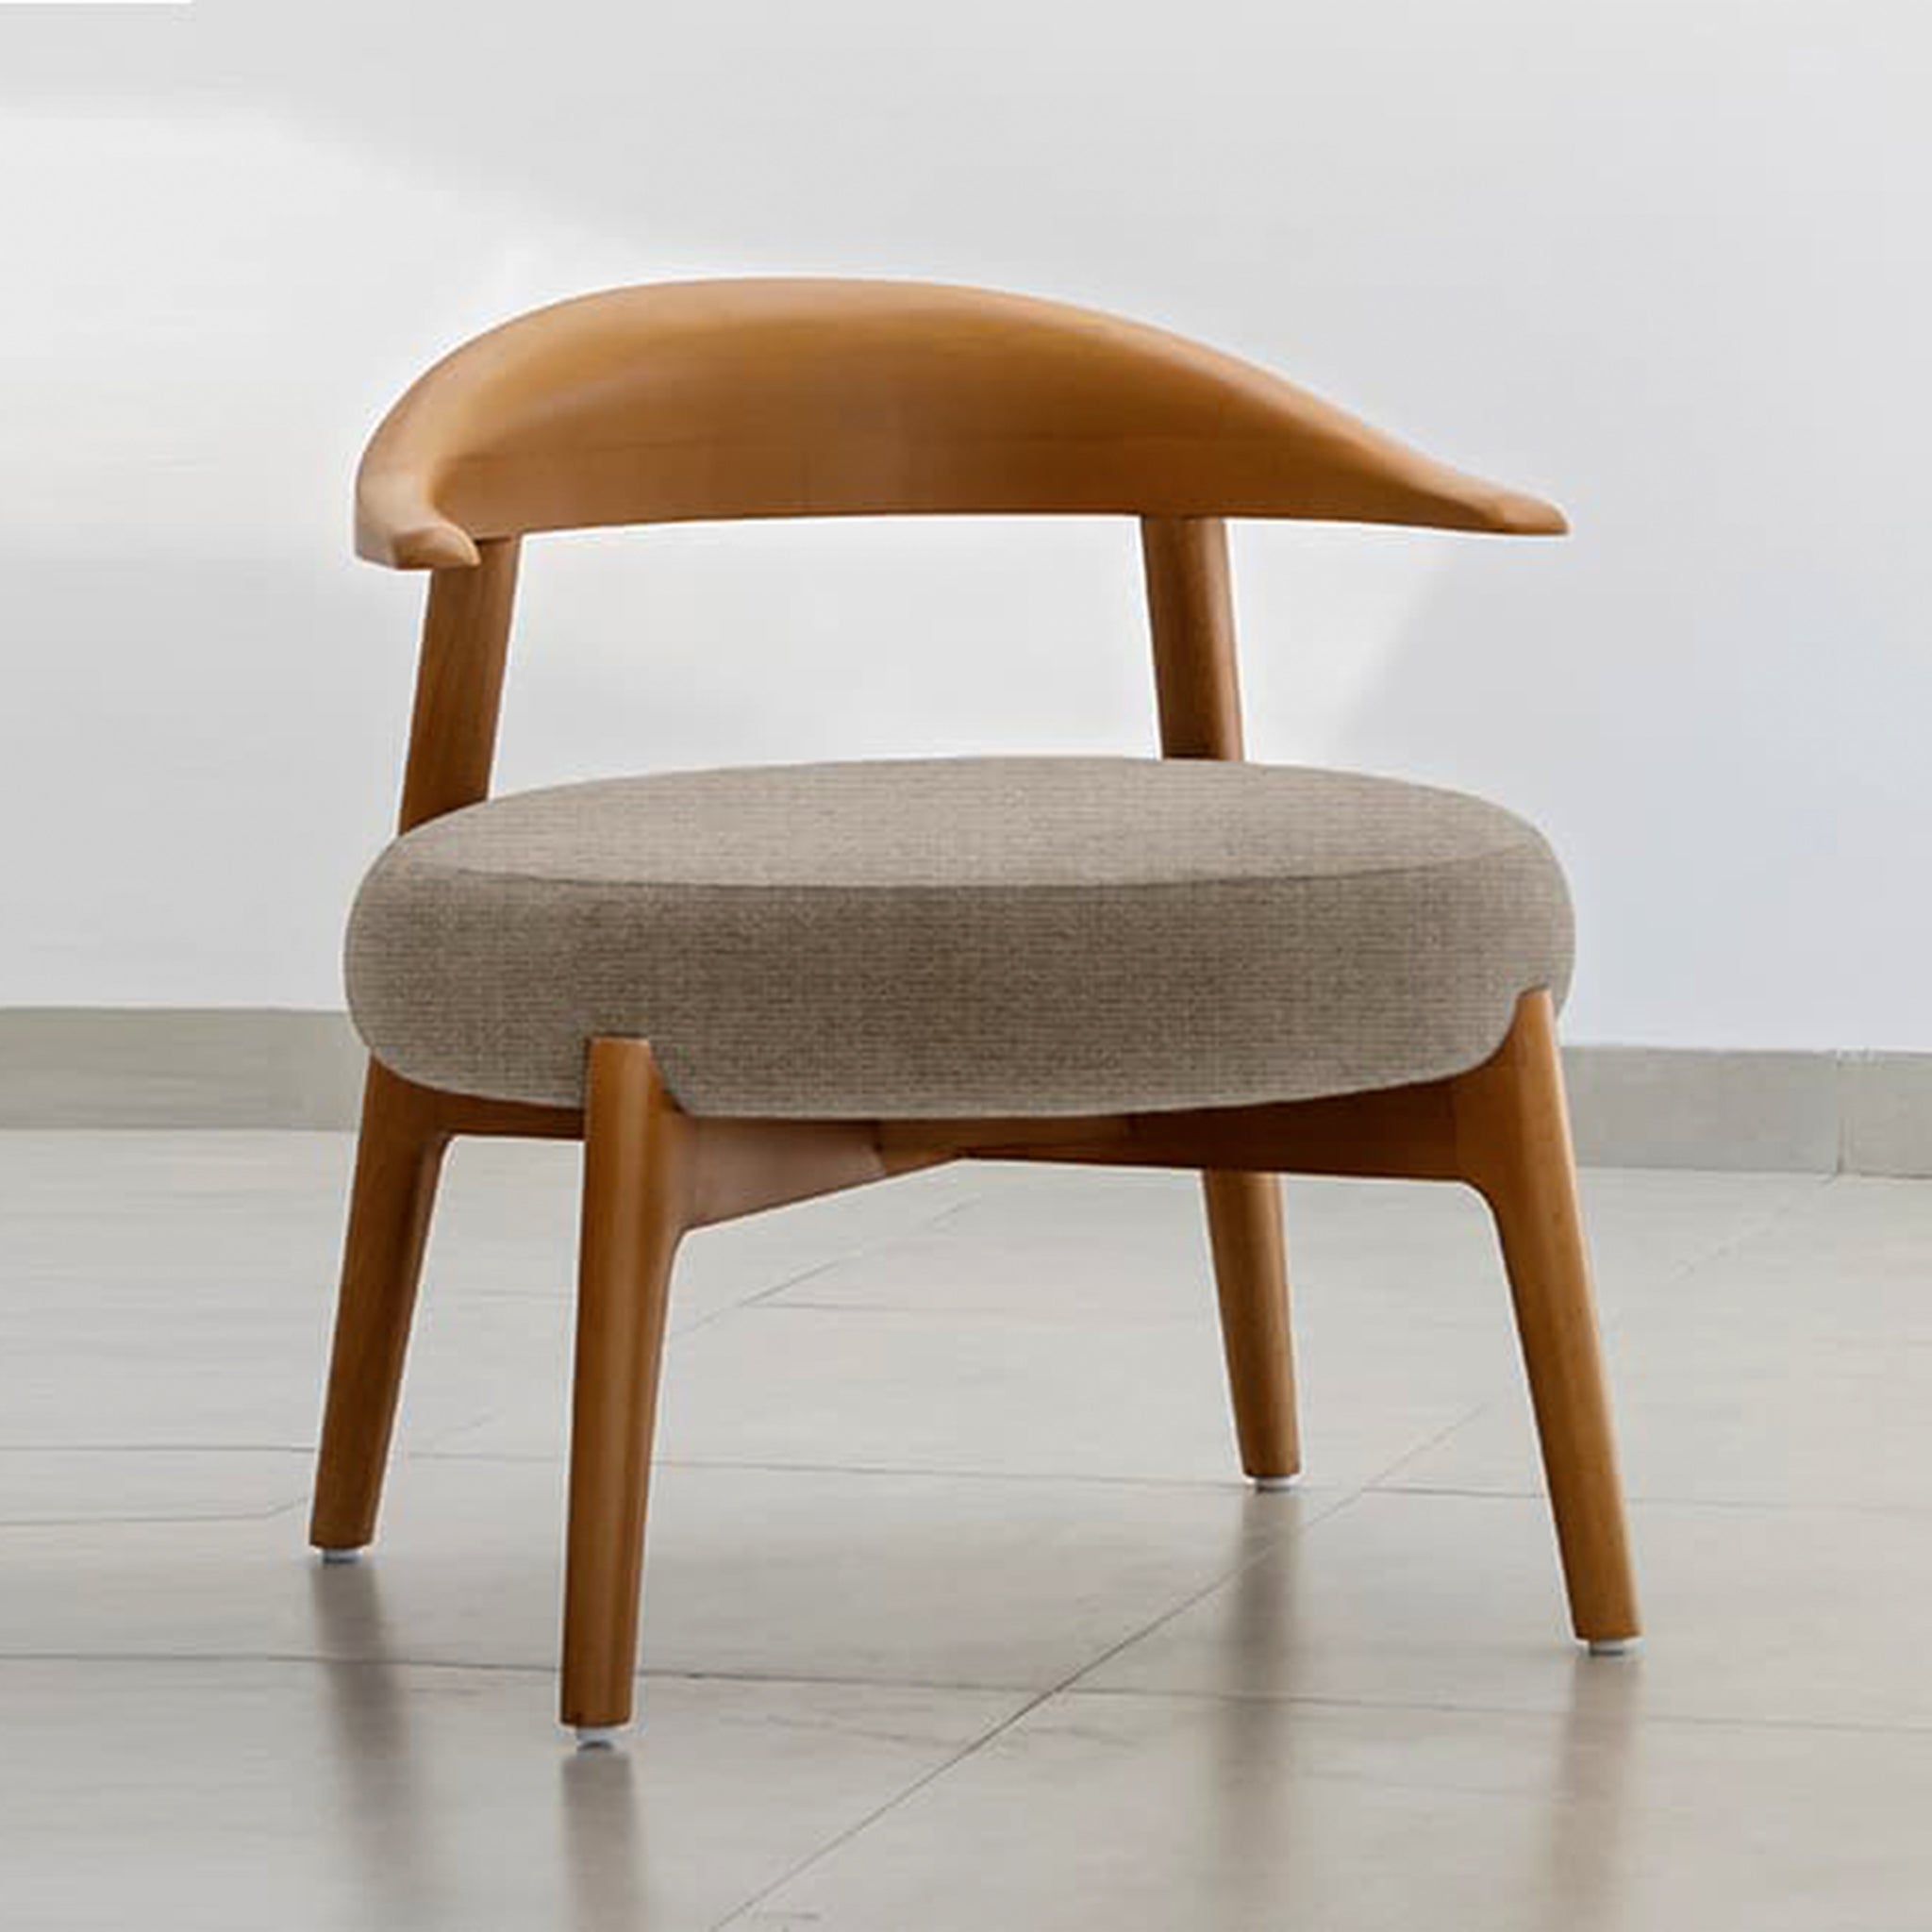 "The Hyde Accent Chair with sleek wooden design and cozy seat"